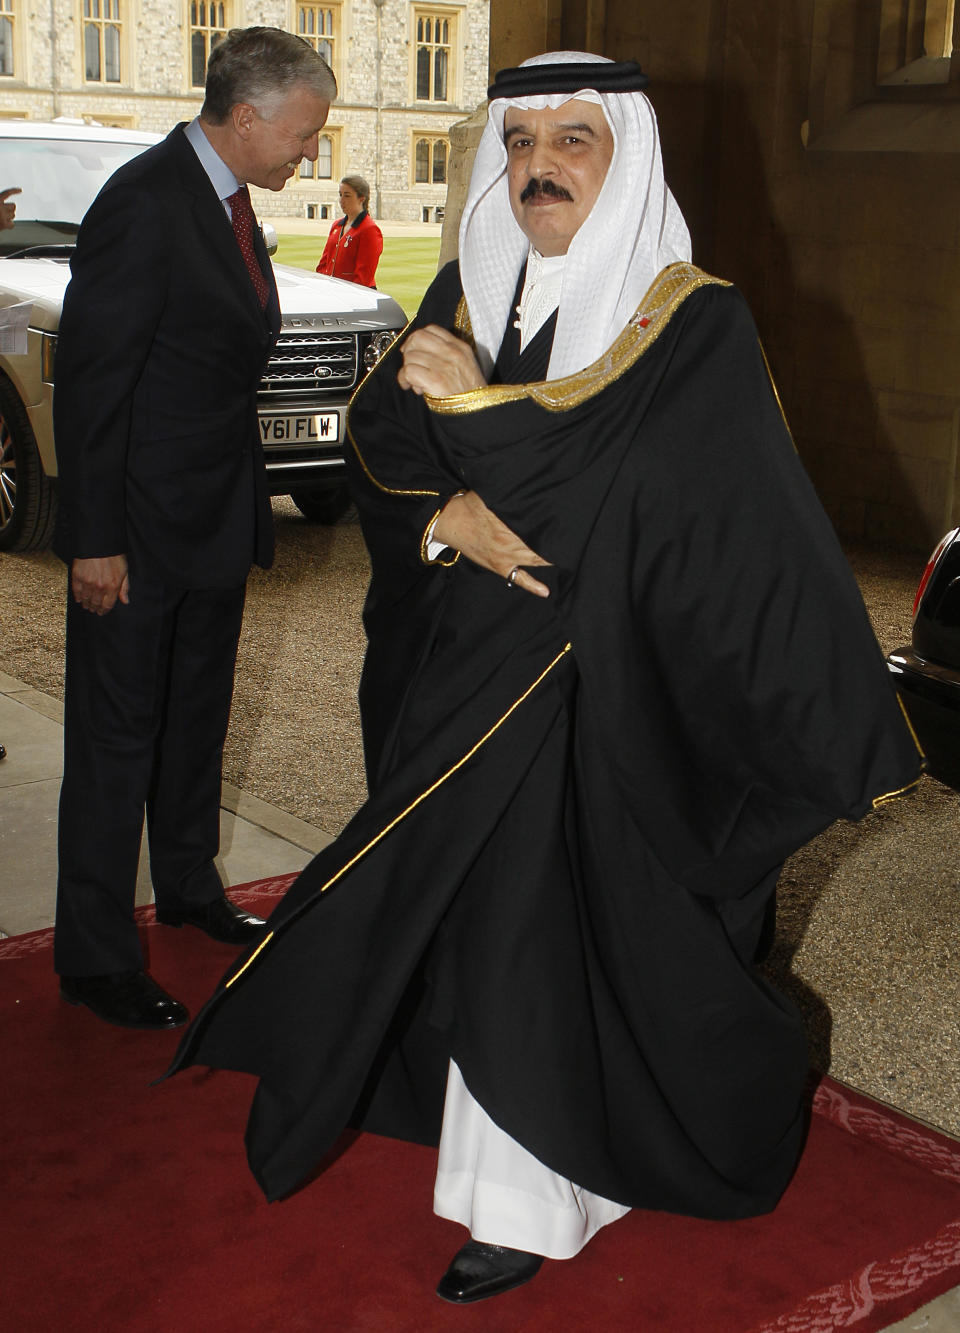 Bahrain's King Hamed bin Isa Al Khalifa arrives for the Monarchs Jubilee lunch at Windsor Castle in Windsor, England, Friday, May 18, 2012. Critics are aghast at the choice of some guests for the lunch, among them a king whose Gulf nation has been engaged in a brutal crackdown on political dissent. The list for Friday's lunch, sent on the advice of British diplomats, includes Bahrain's King Hamad bin Isa Al Khalifa. Swaziland's King Mswati III, accused of living in luxury while his people go hungry, is also invited. (AP Photo/Kirsty Wigglesworth, pool)